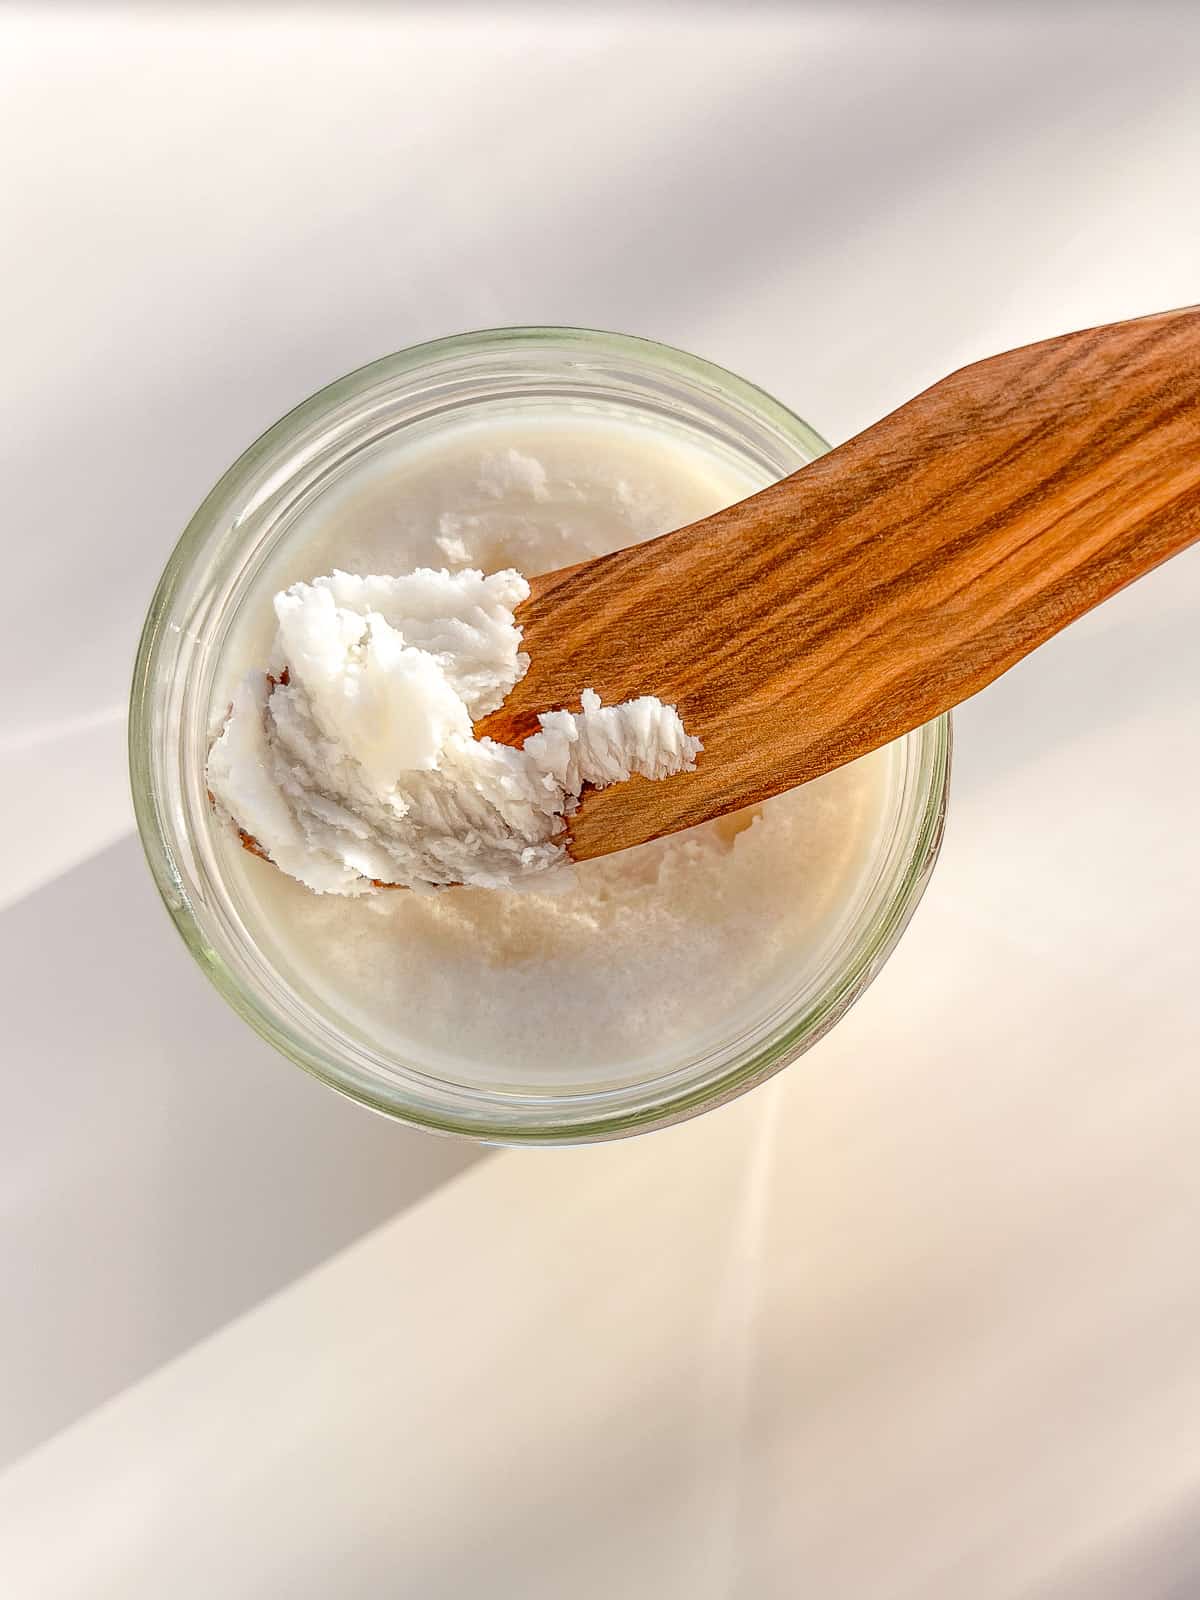 An image of coconut butter in a glass jar with a wooden spreader perched on top.